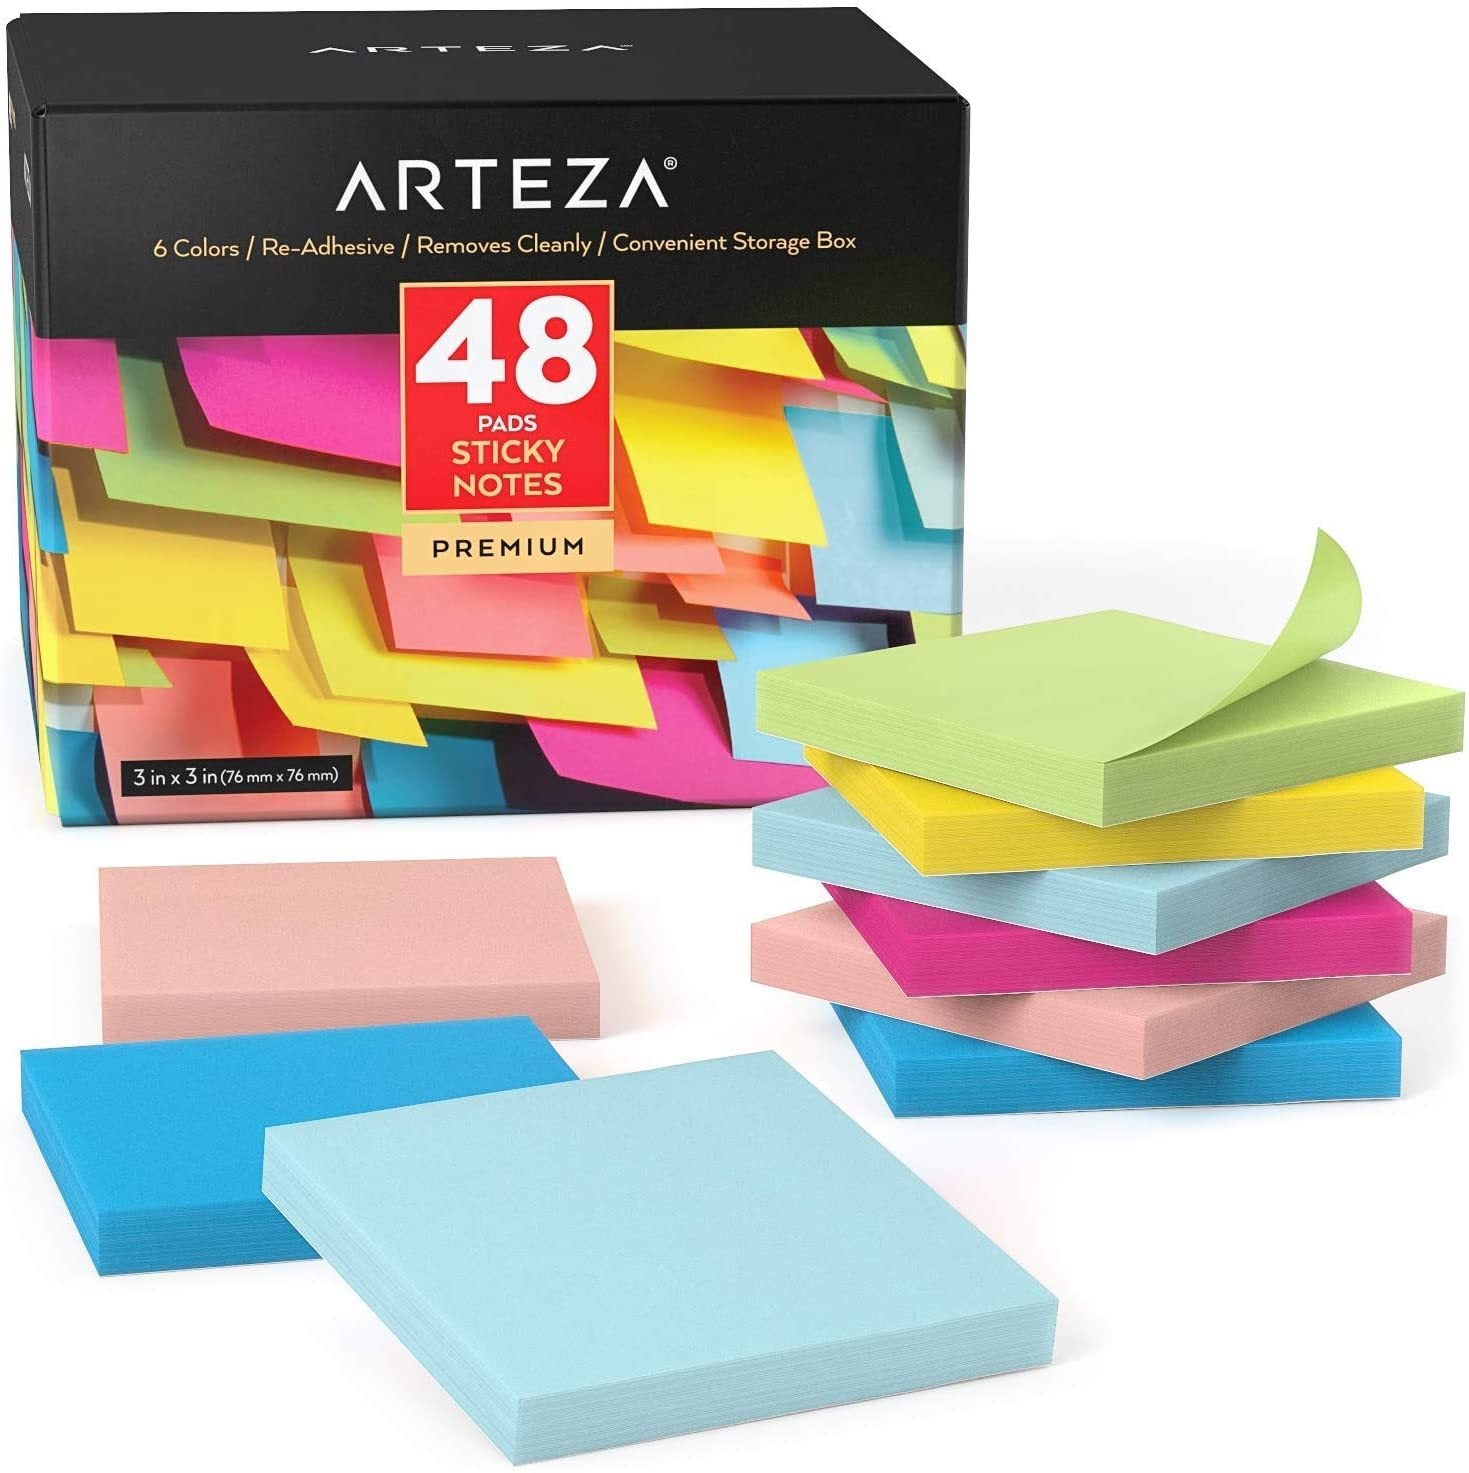 Post-it Super Sticky Big Notes, Single Color (Yellow), Double Adhesion, 11  in x 11 in